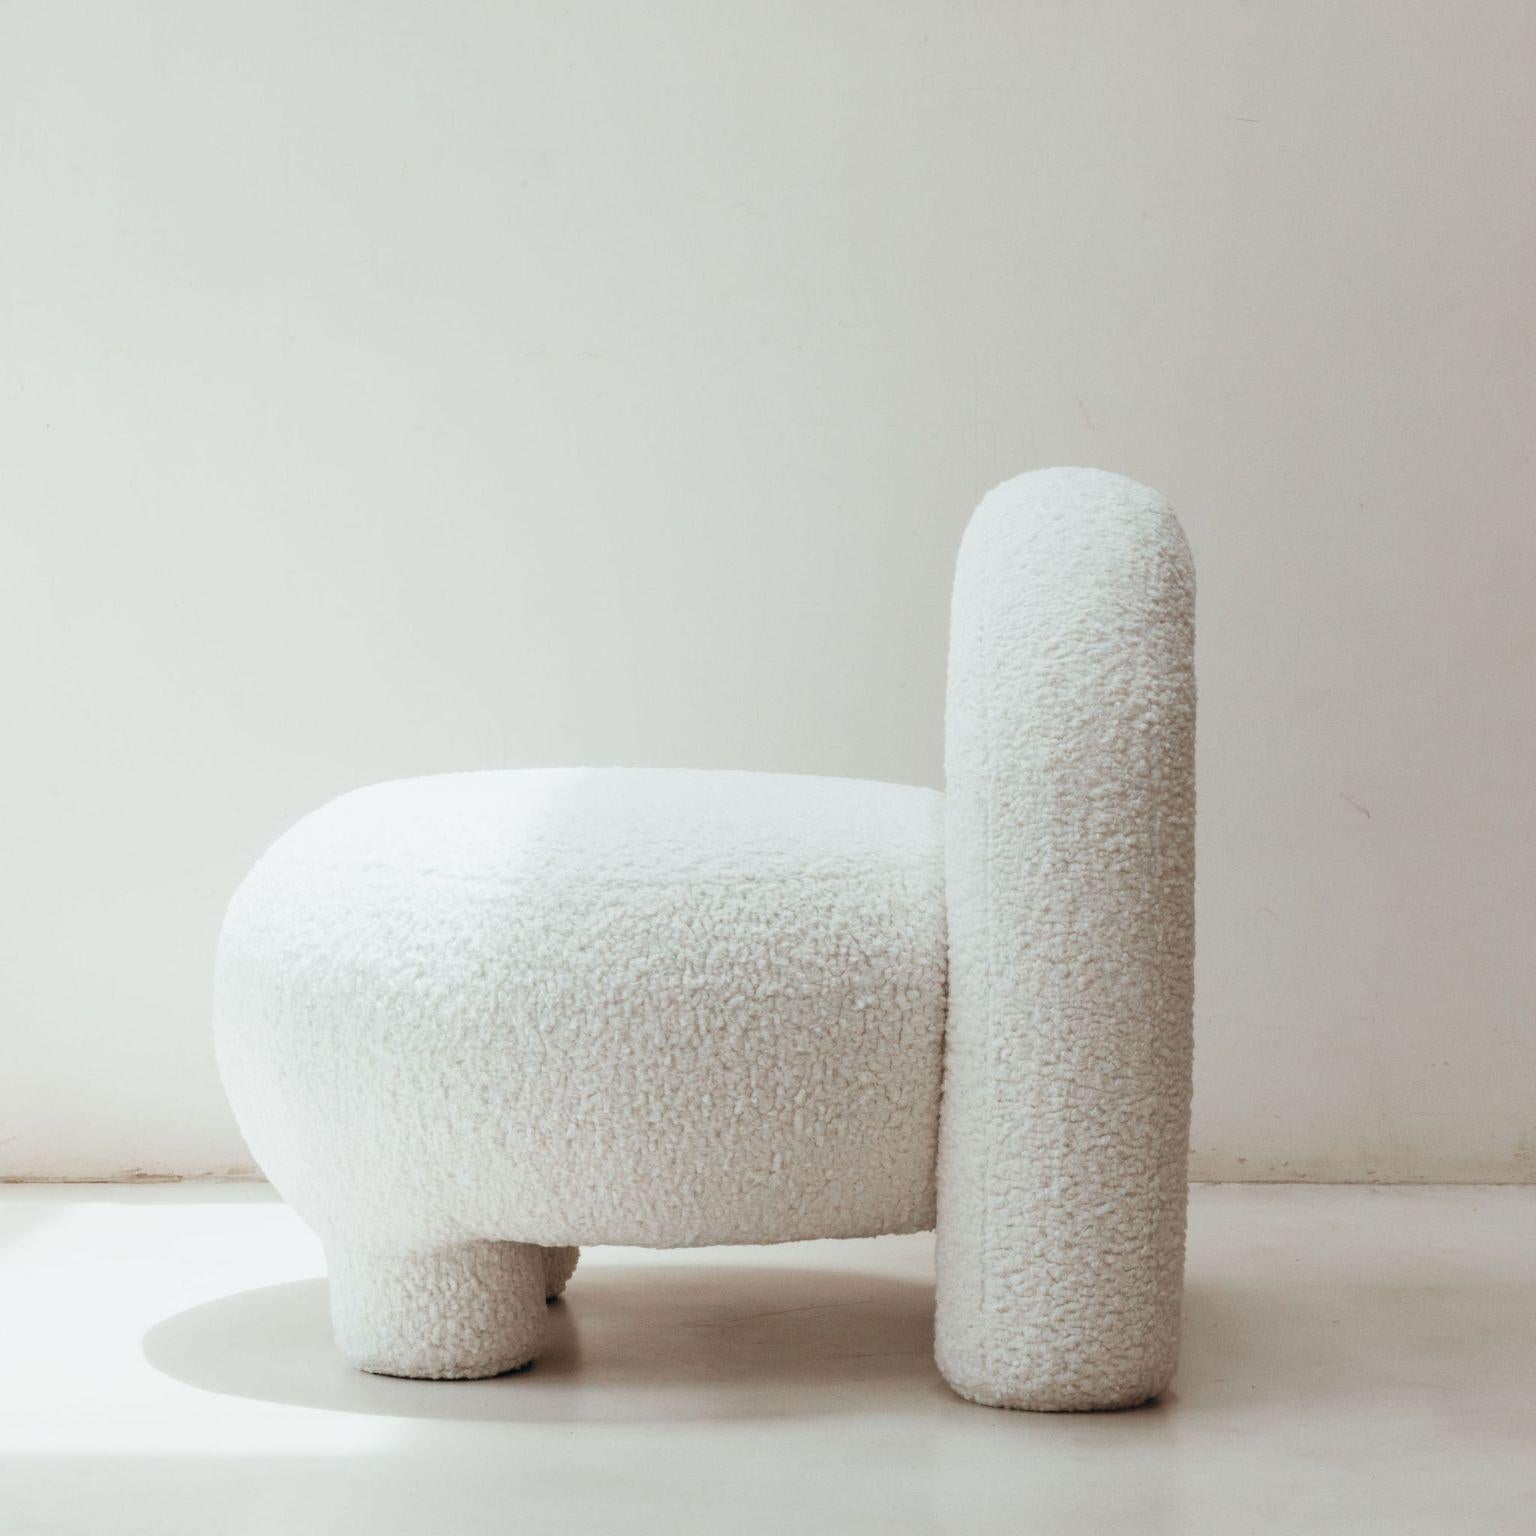 Other Folk Poufchair by David Del Valle For Sale